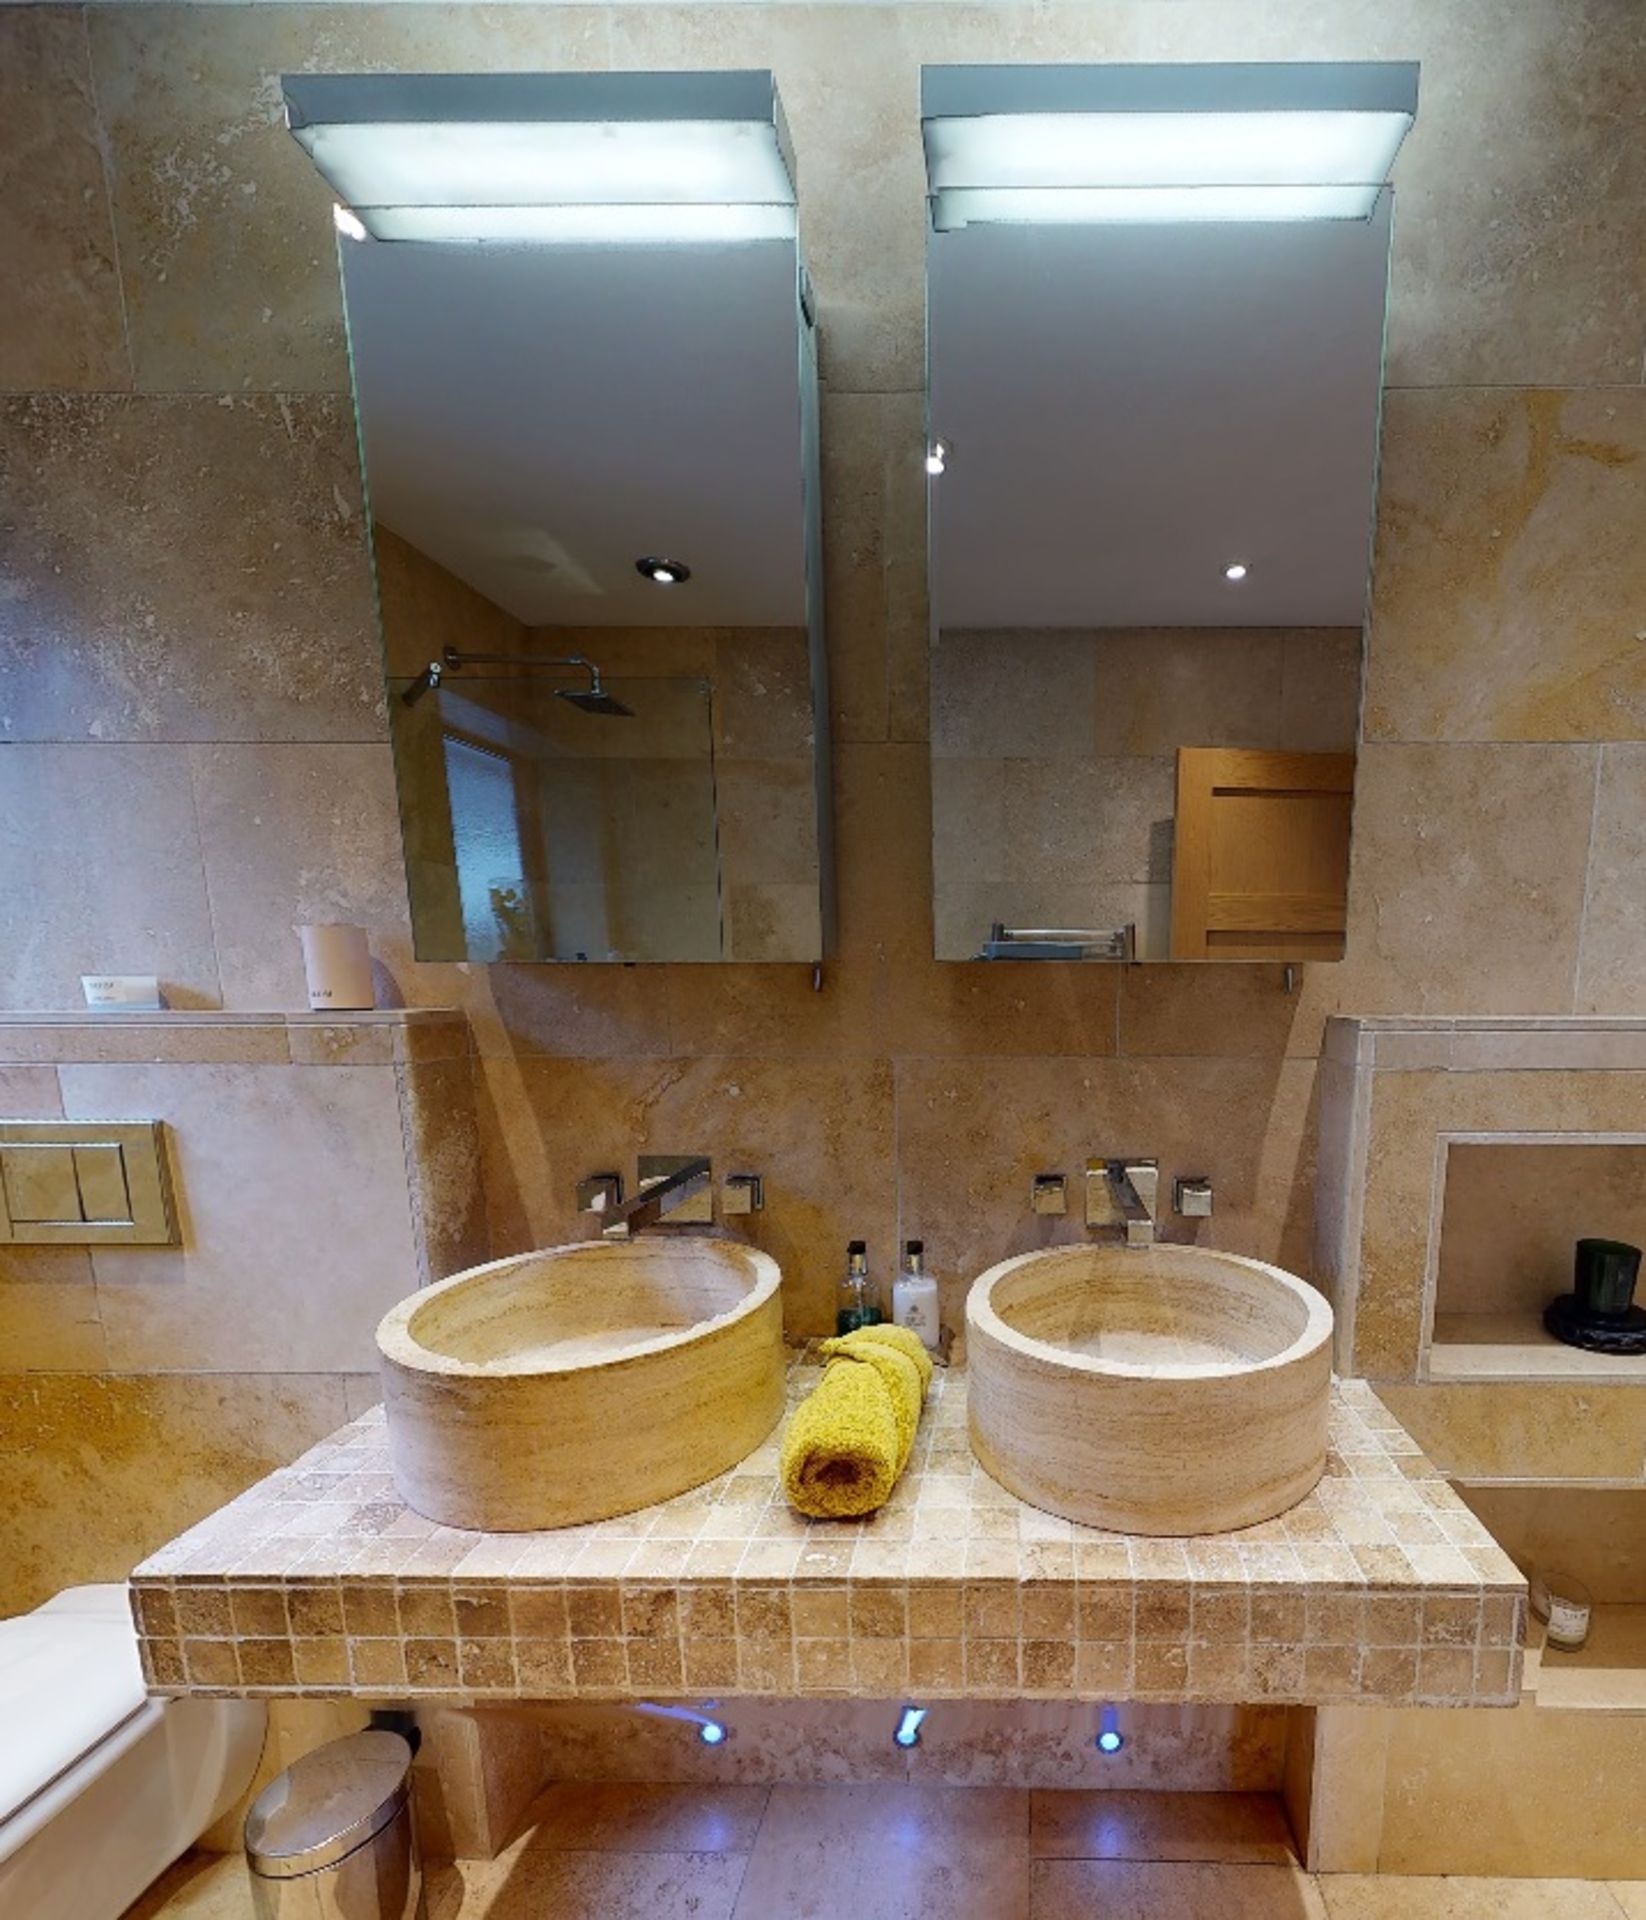 Contents Of A Luxury En-suite Bathroom With Shower - Ref: MAIN/BTH - CL775 - NO VAT ON THE HAMMER - Image 7 of 7